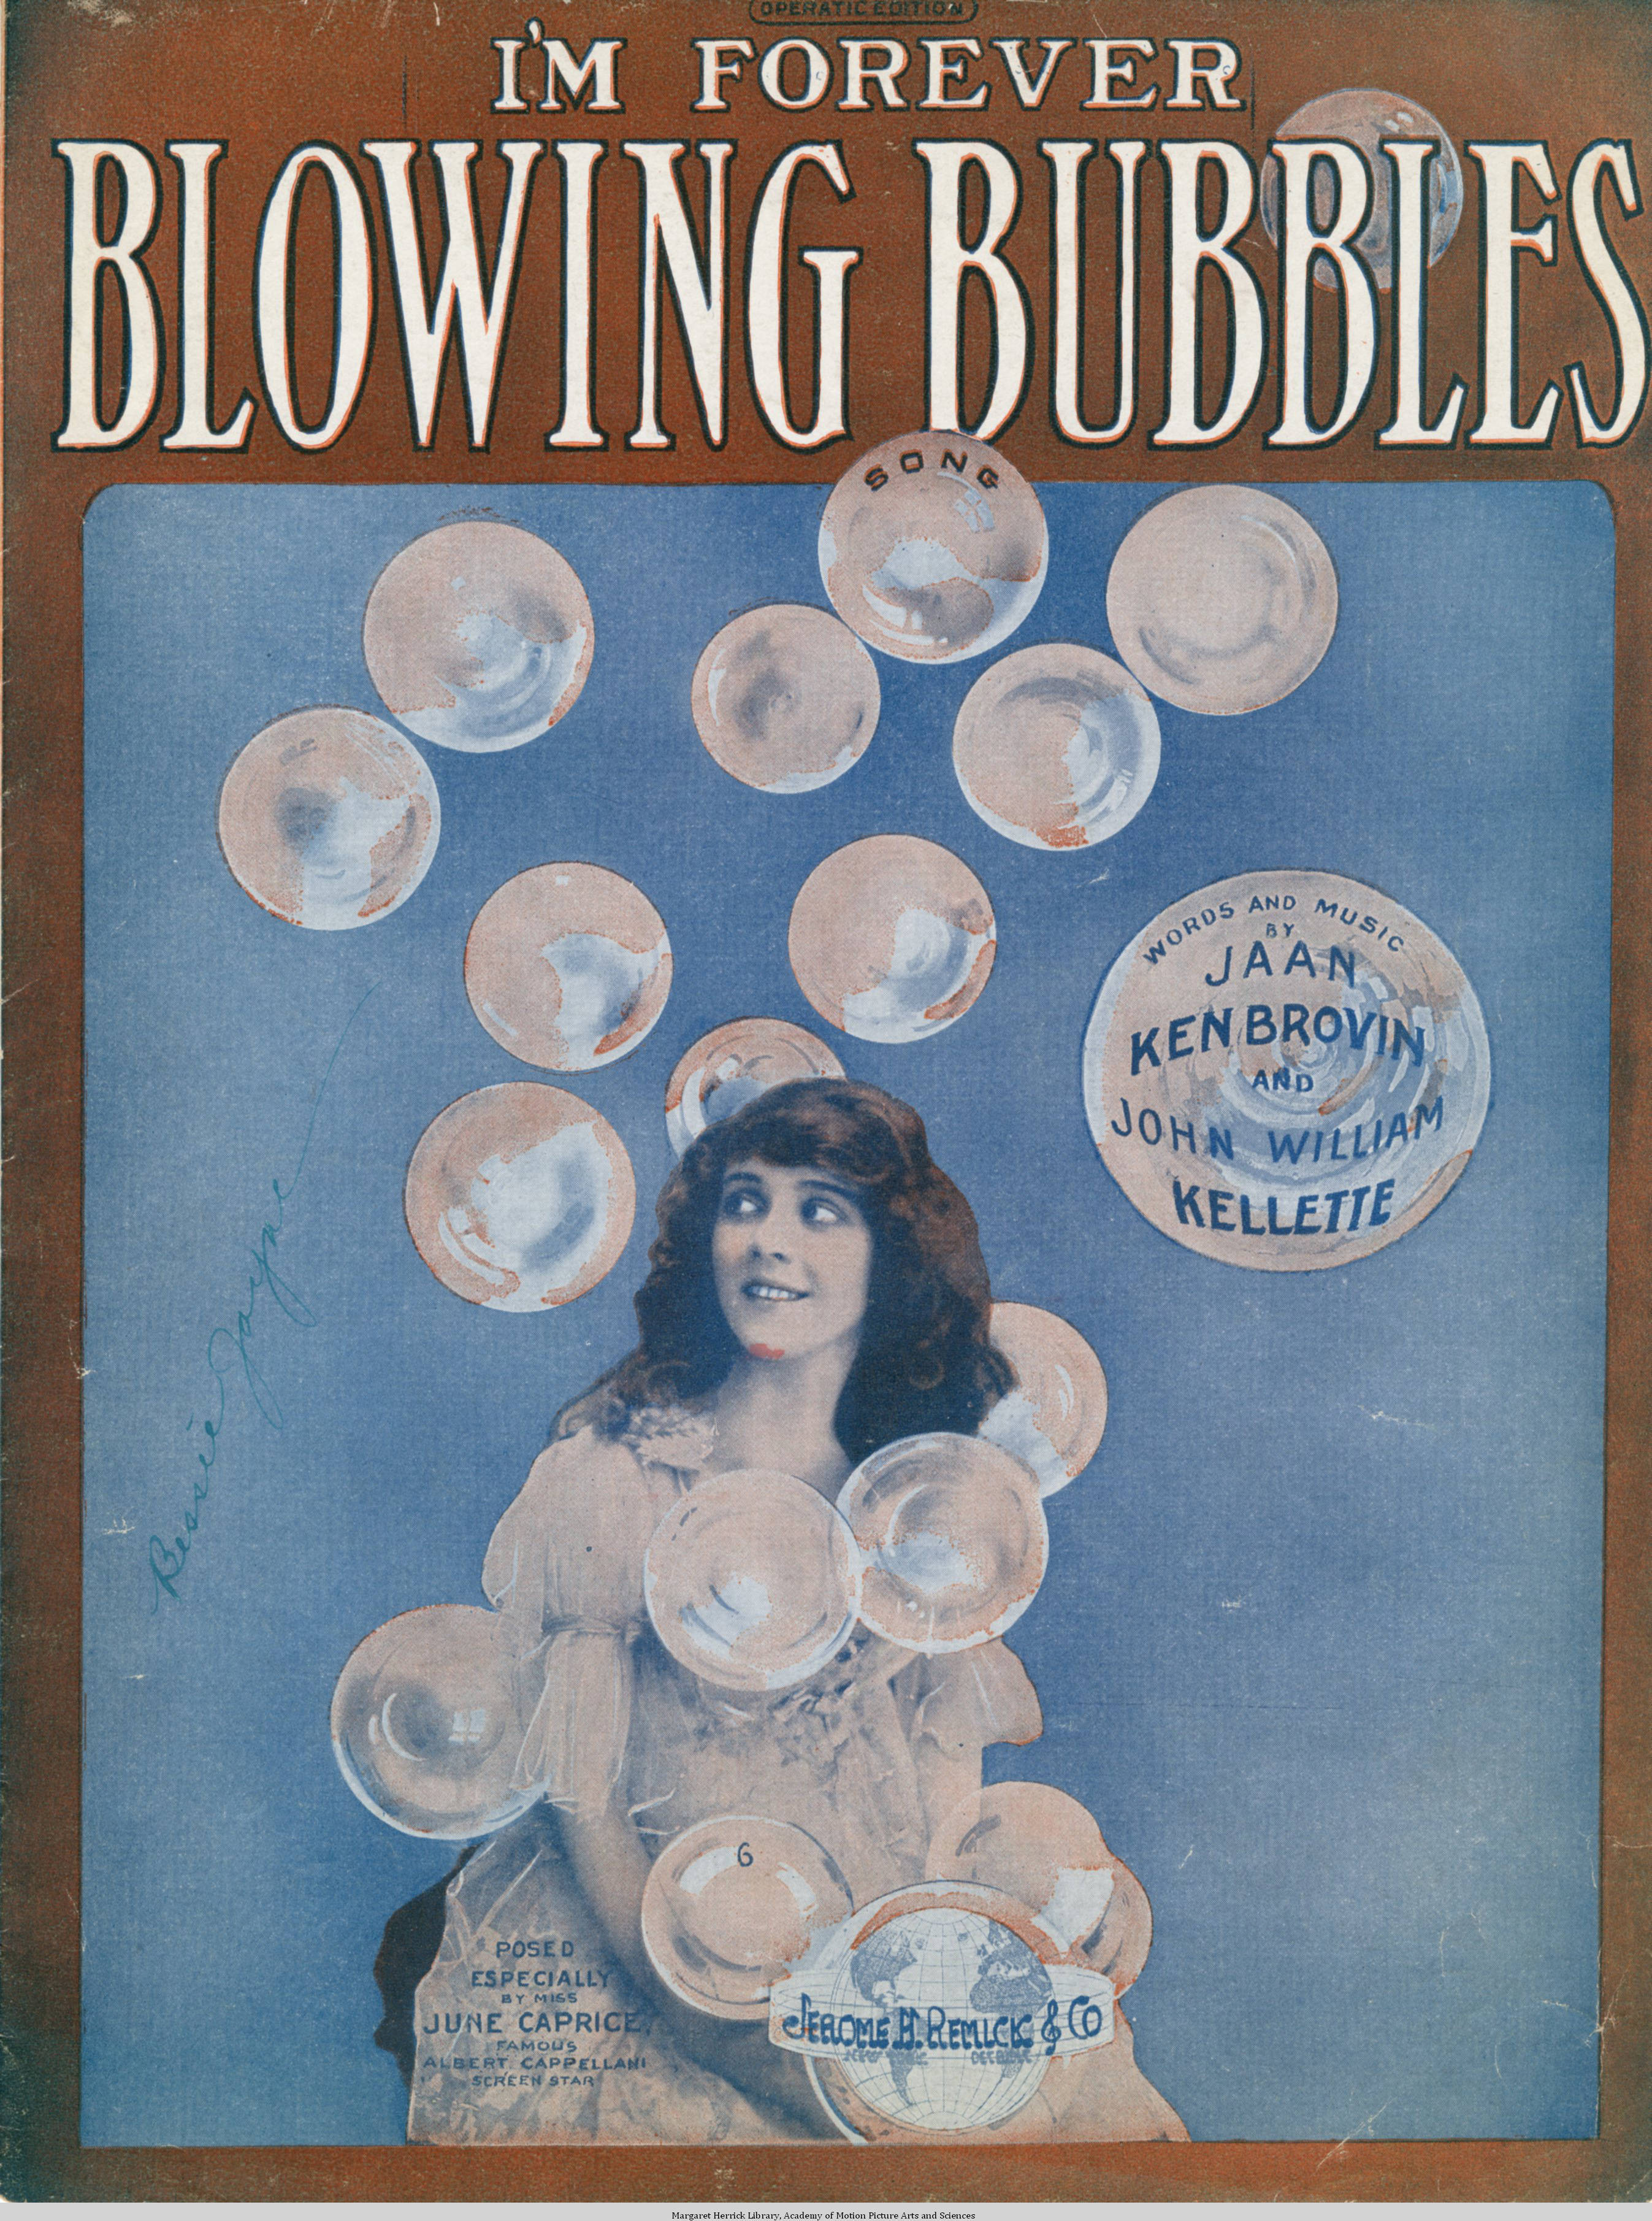 Sheet music cover - I'M FOREVER BLOWING BUBBLES - SONG (1919)